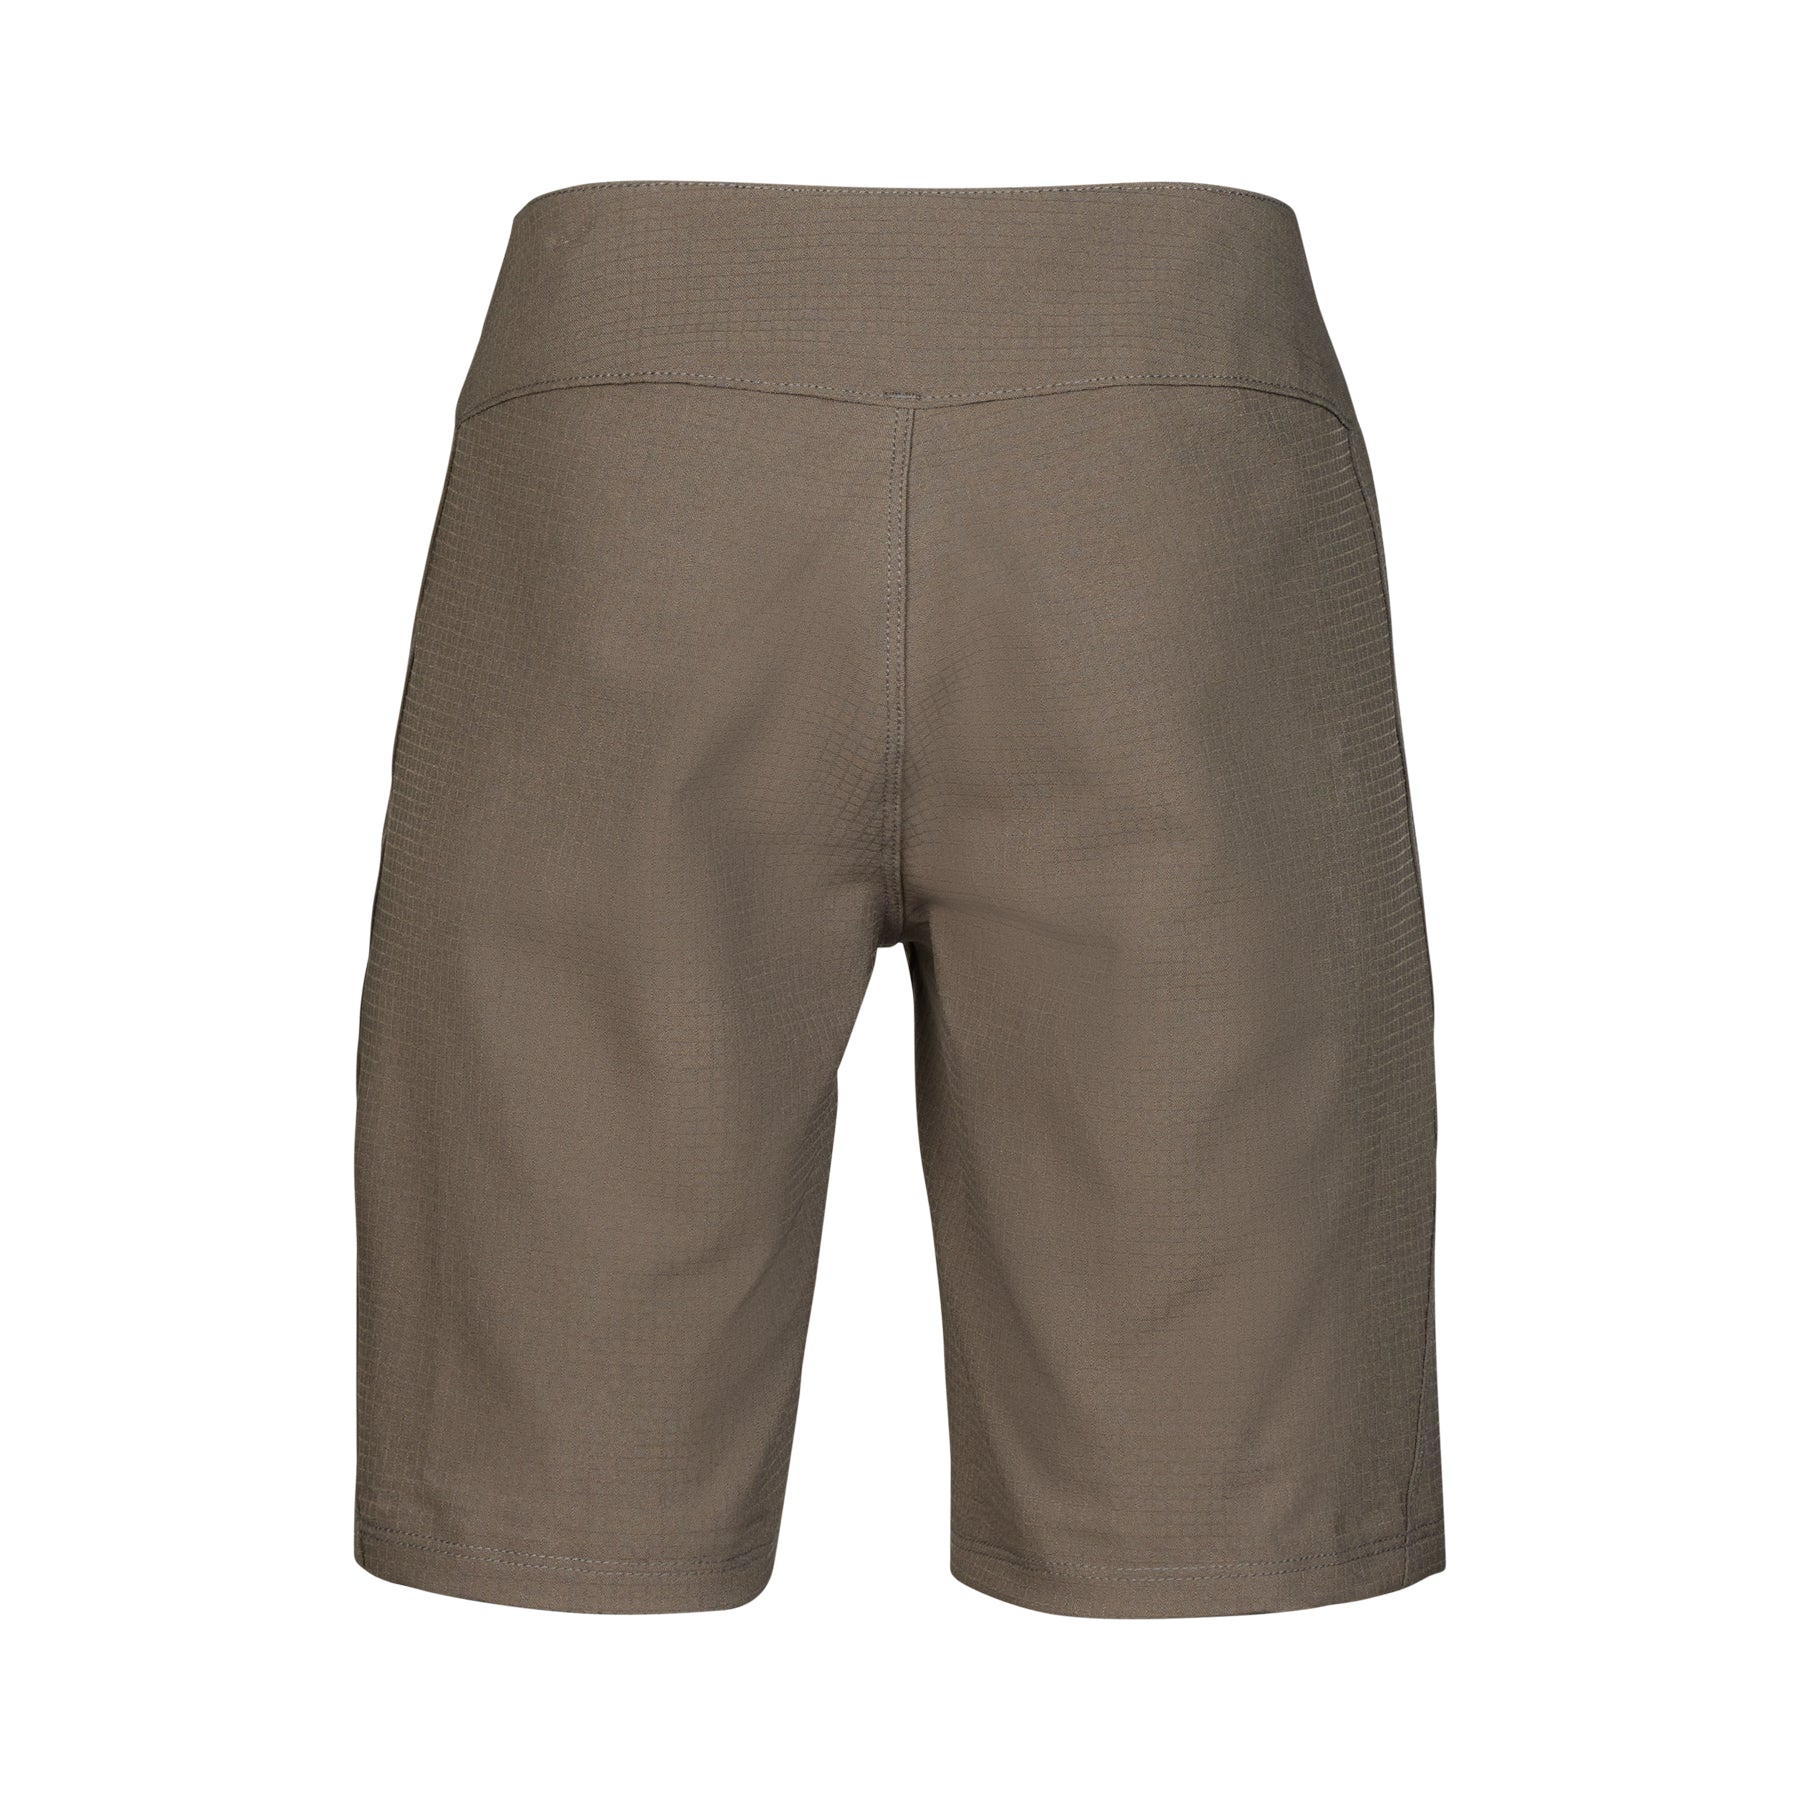 Fox Defend Youth Shorts - Youth L-26 - Dirt - Image 2